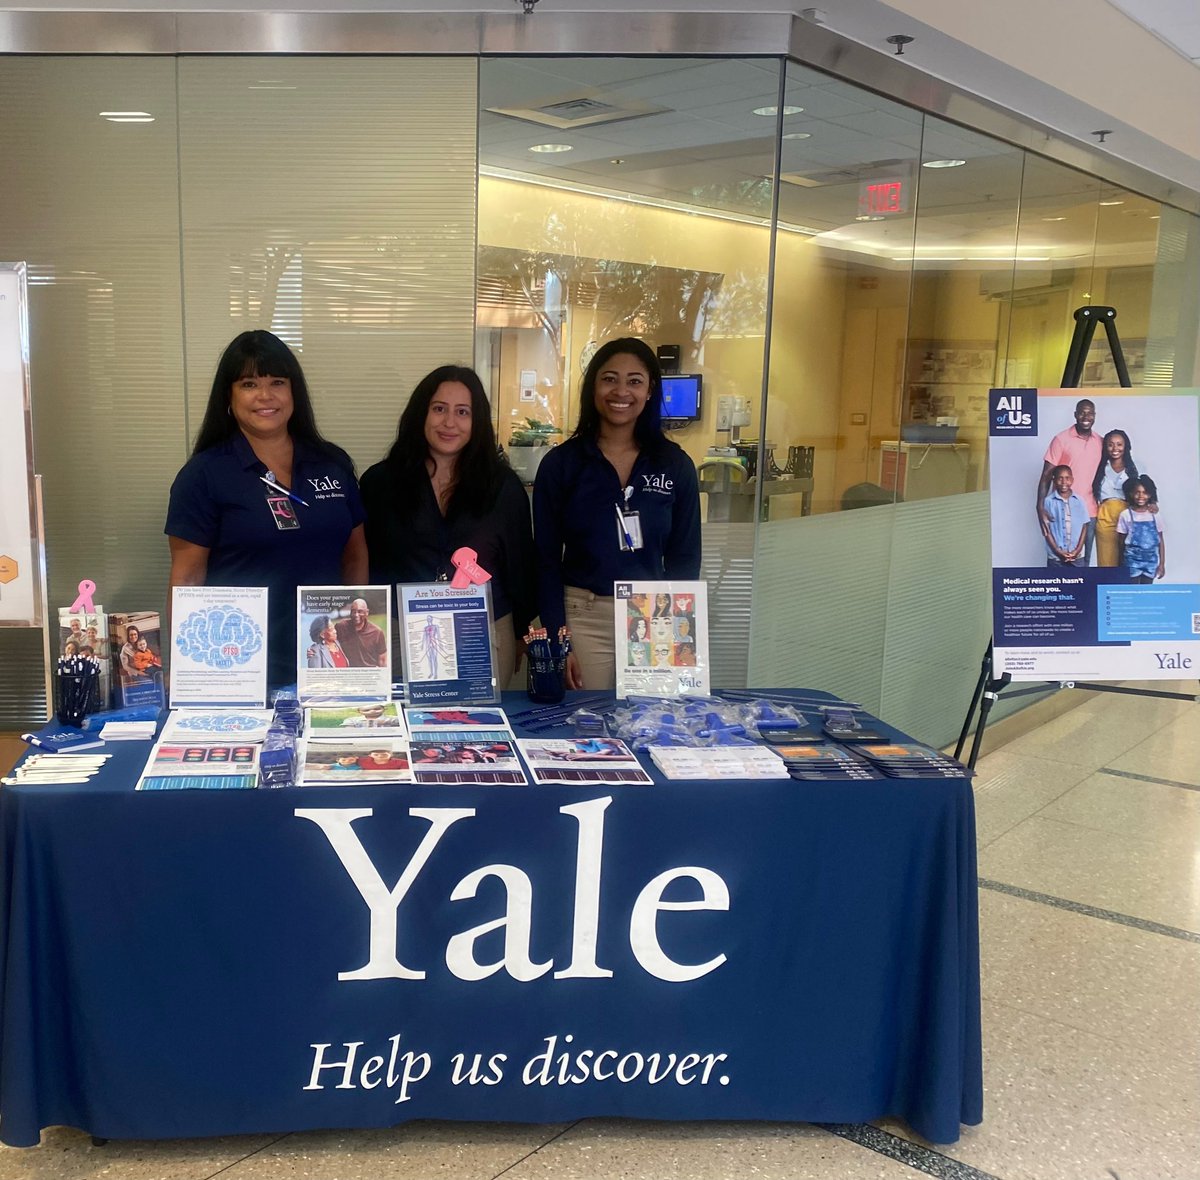 Come visit Iris, Jackie & Geisa from 11- 1 today at the @YNHH atrium (near the cafeteria) and find out how you can be a #helpusdiscover hero by participating in #clinicalresearch! #Yale has hundreds of trials to participate in.